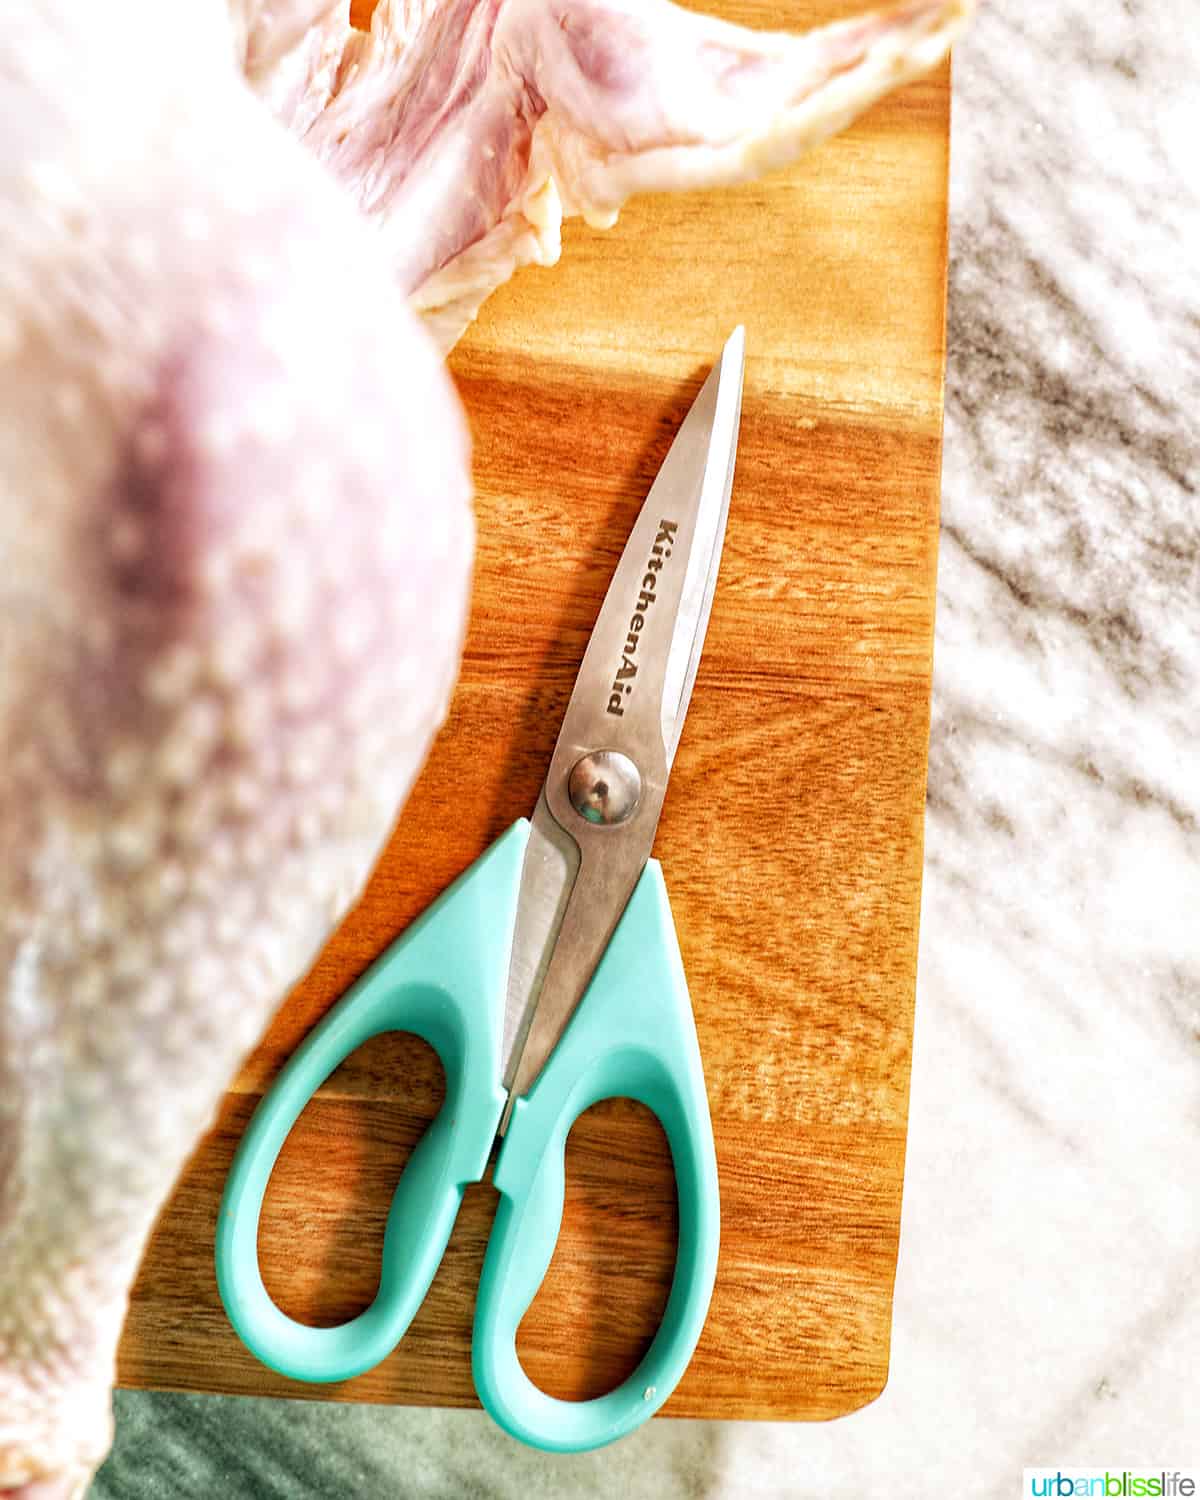 KitchenAid kitchen shears to spatchcock a turkey on a cutting board.